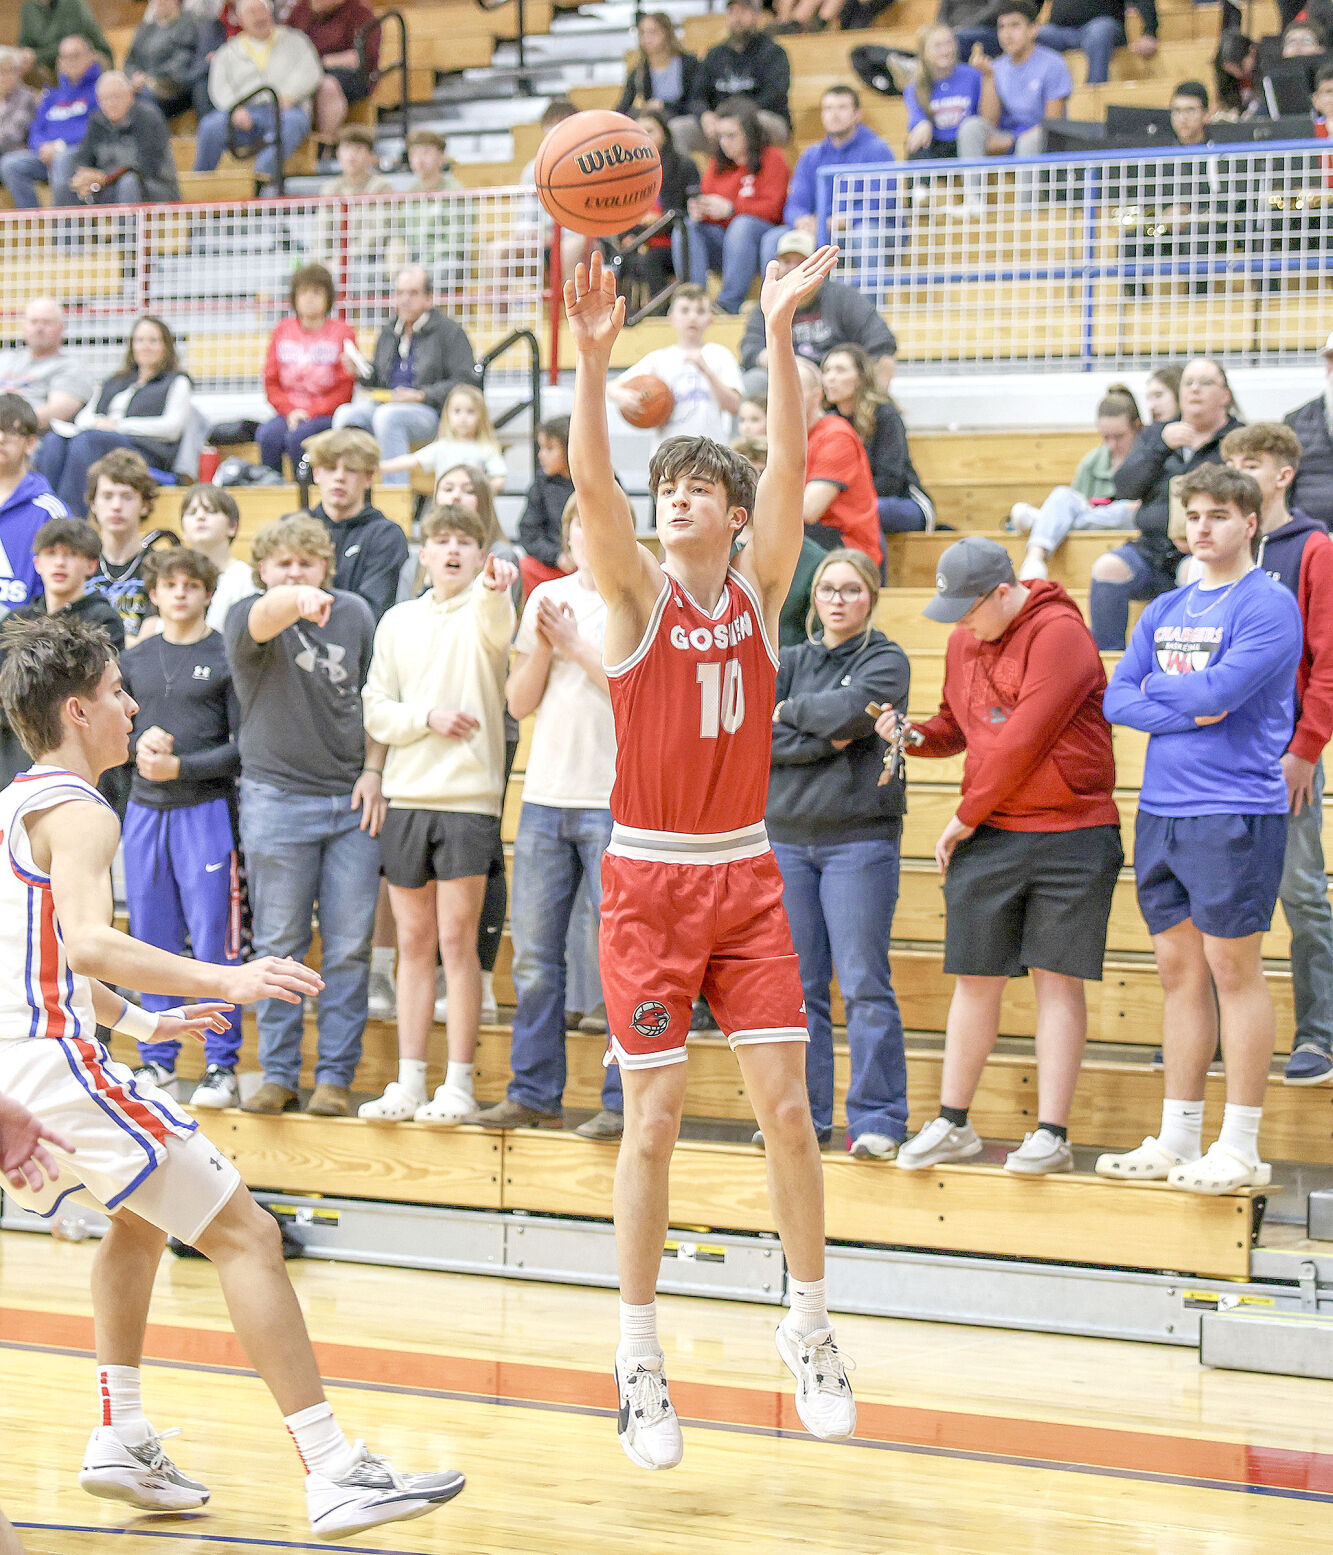 Goshen Beats West Noble 45-44 with Sawatzky and Cline Leading the Charge